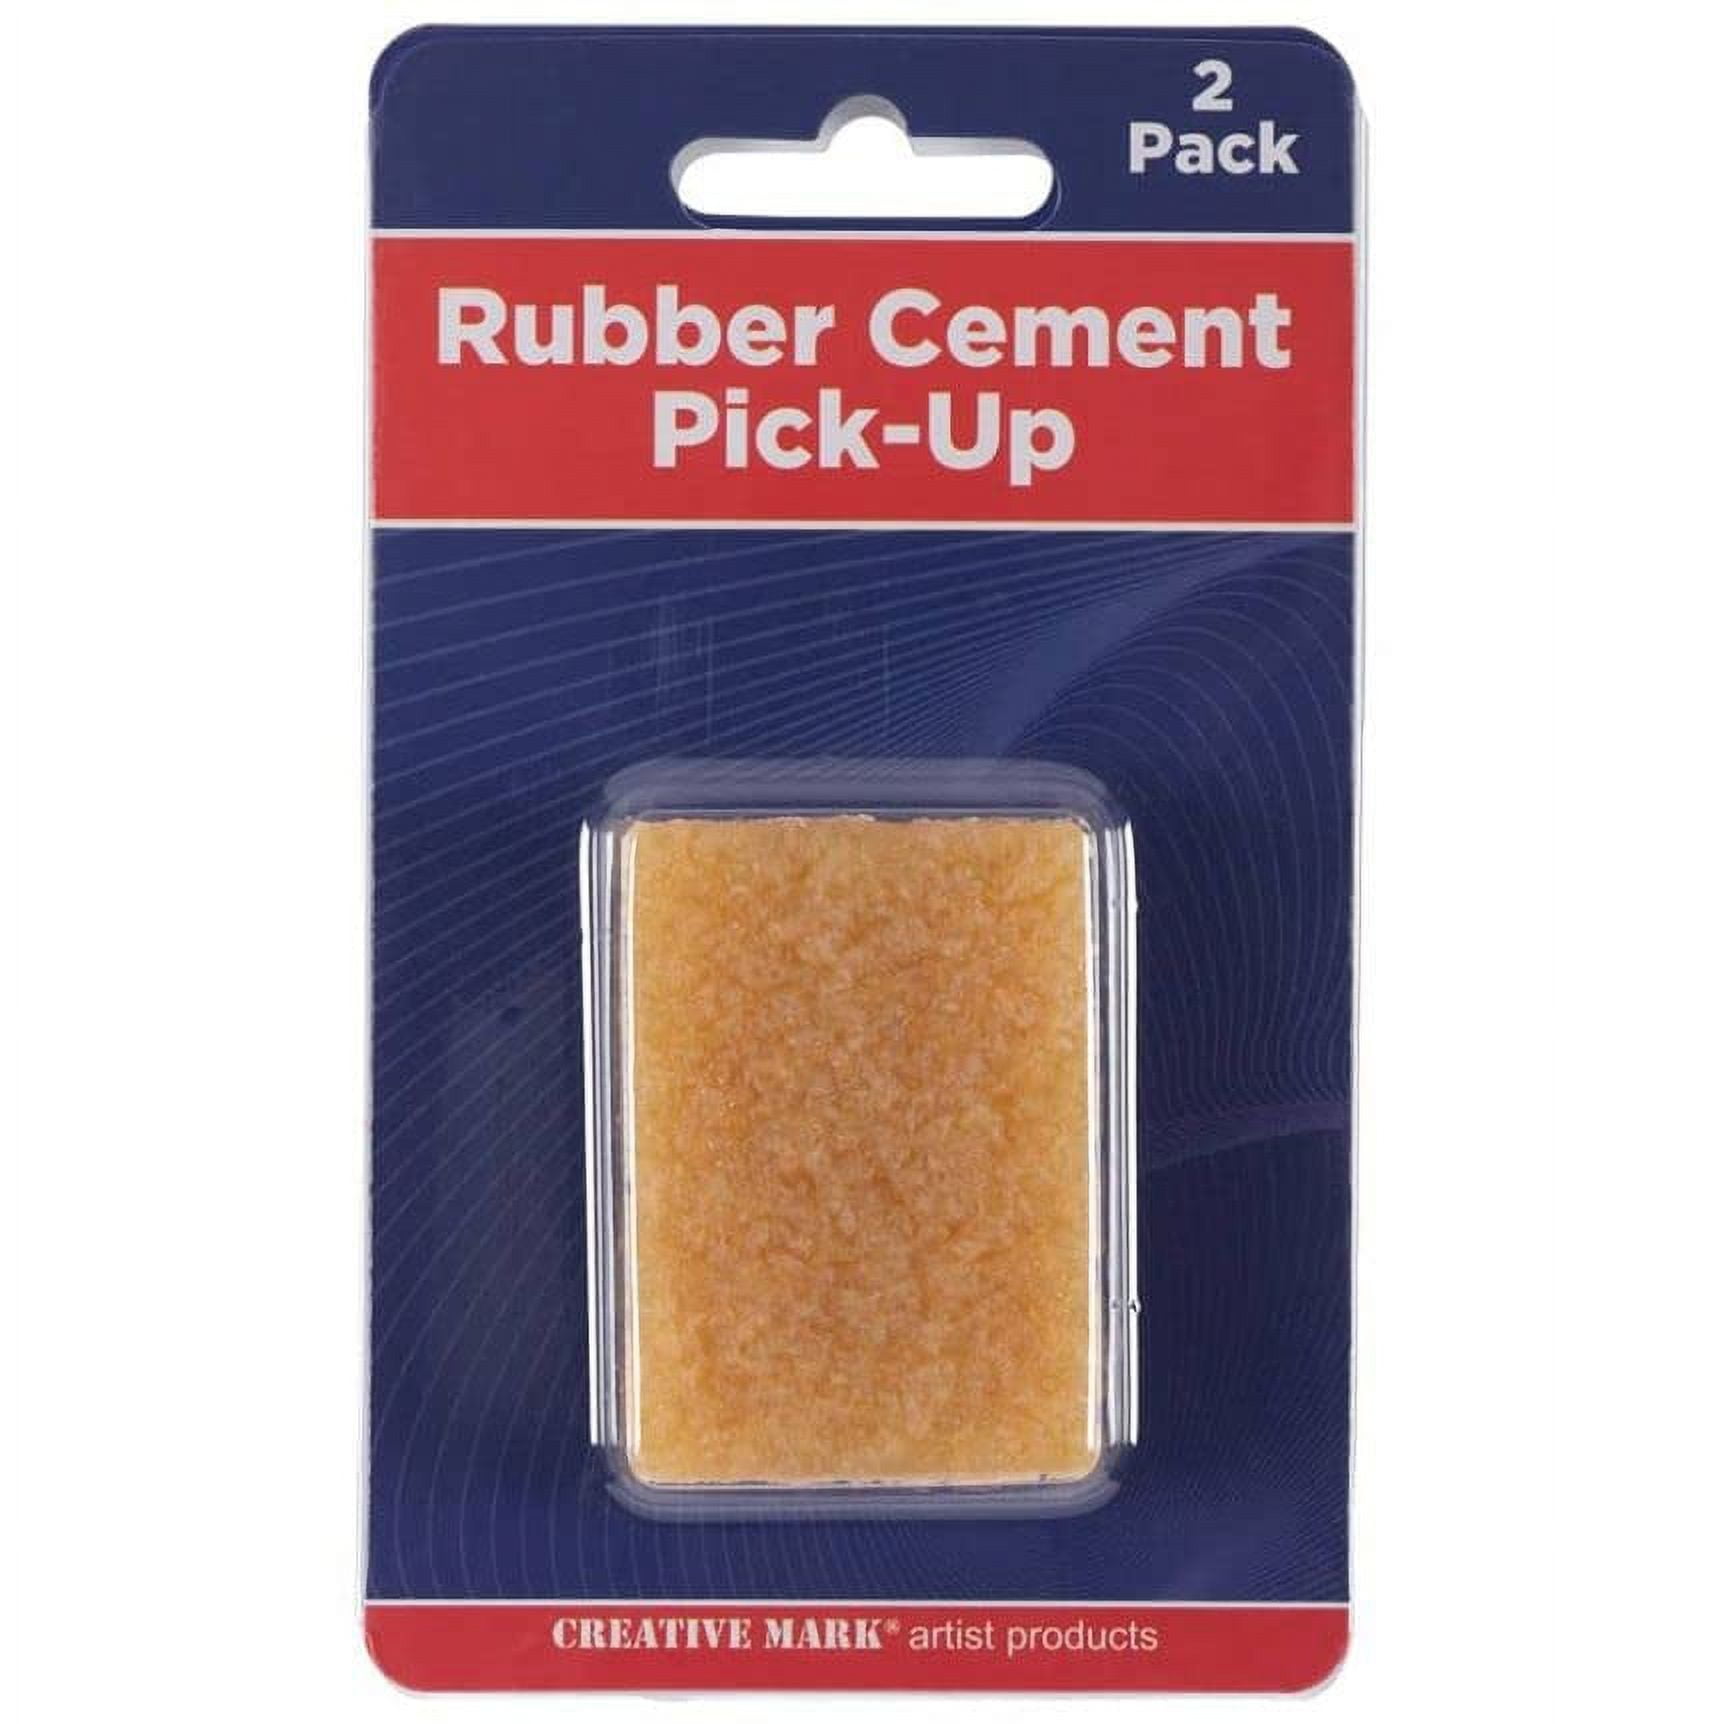 6PCS Rubber Cement Eraser, Glue Runner Eraser, Glue Residue Pick-Up Eraser  For Removing Adhesive And Residues - AliExpress